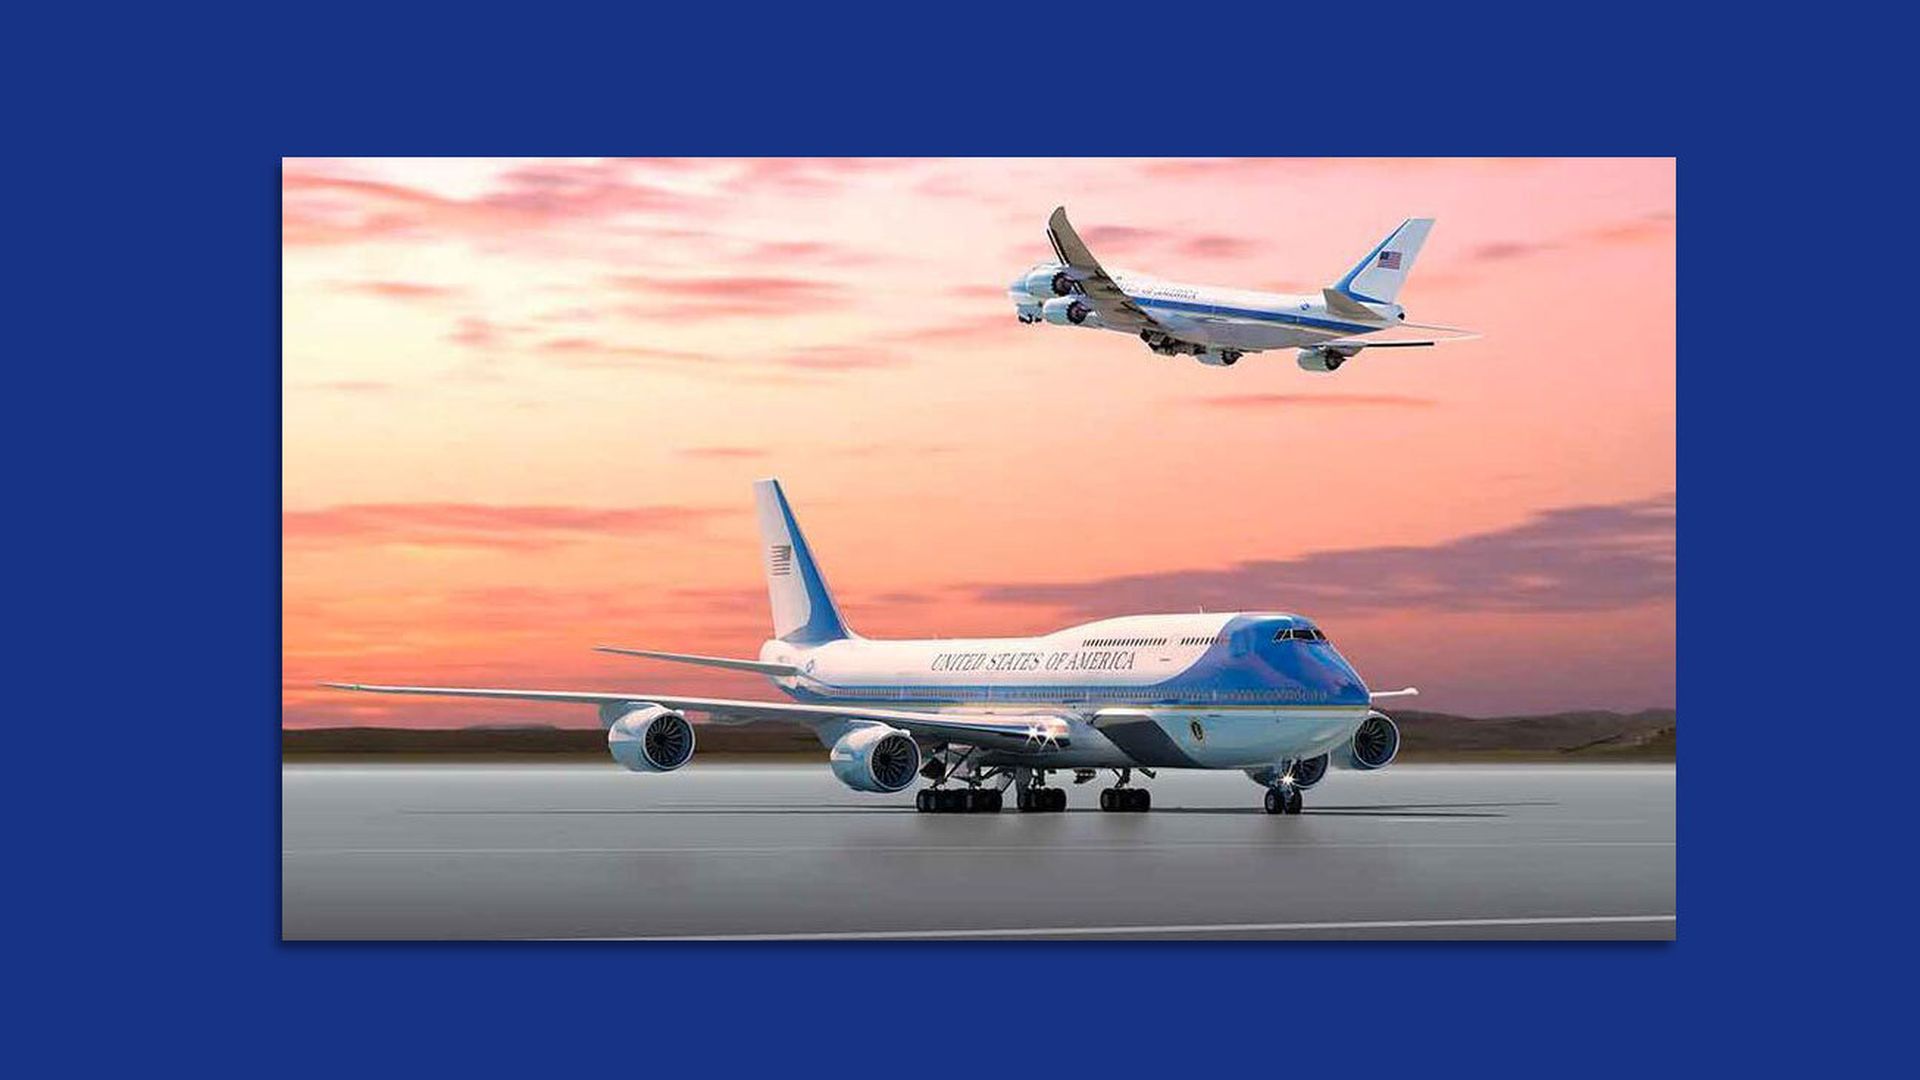 Photo illustration of the new Air Force One 747s